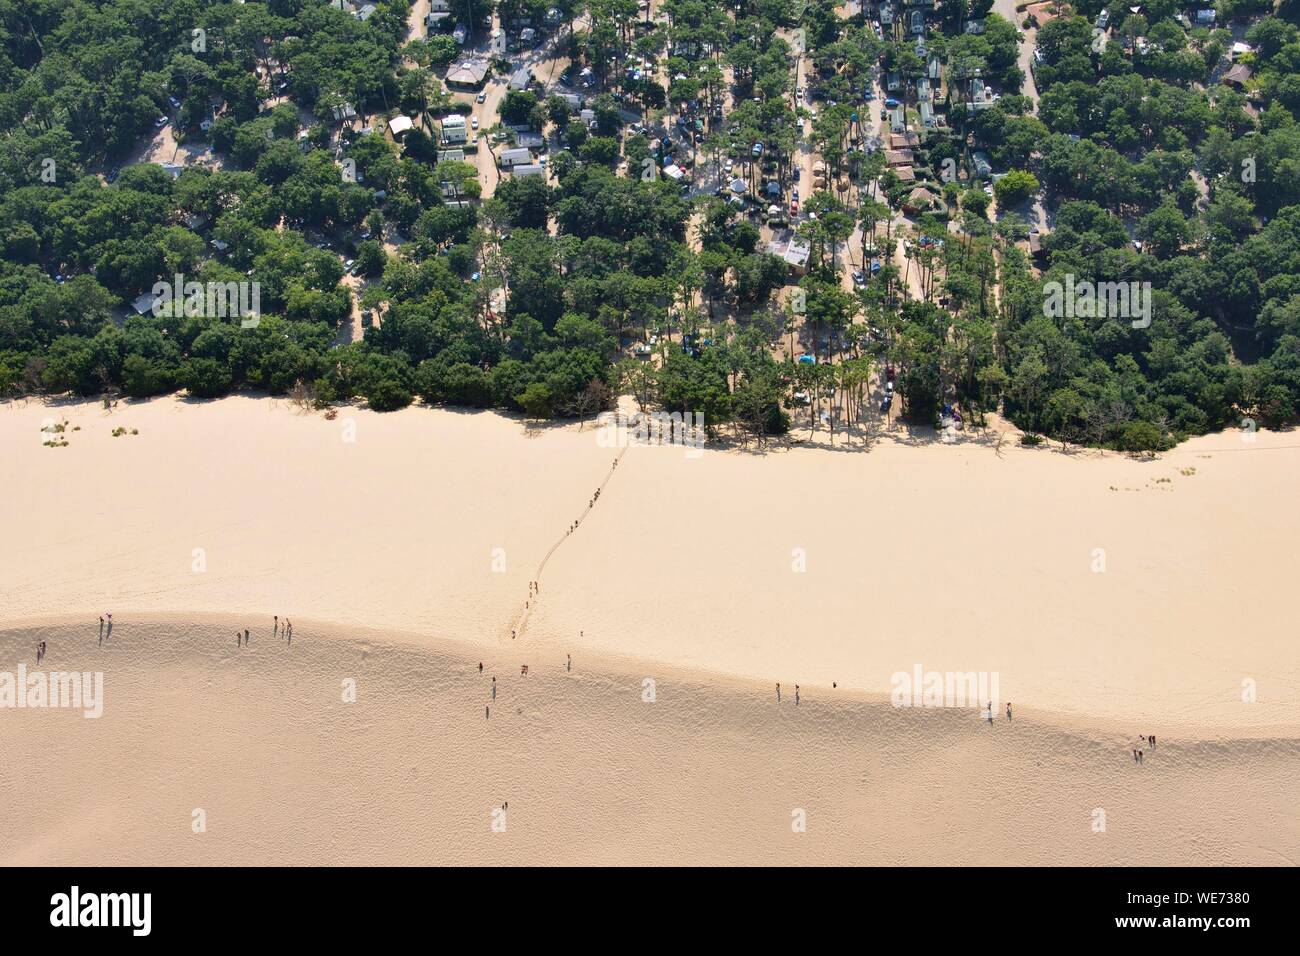 France, Gironde, Bassin d'Arcachon, Landes Forest, Dune du Pilat (the Great Dune of Pyla) (aeria view) Stock Photo